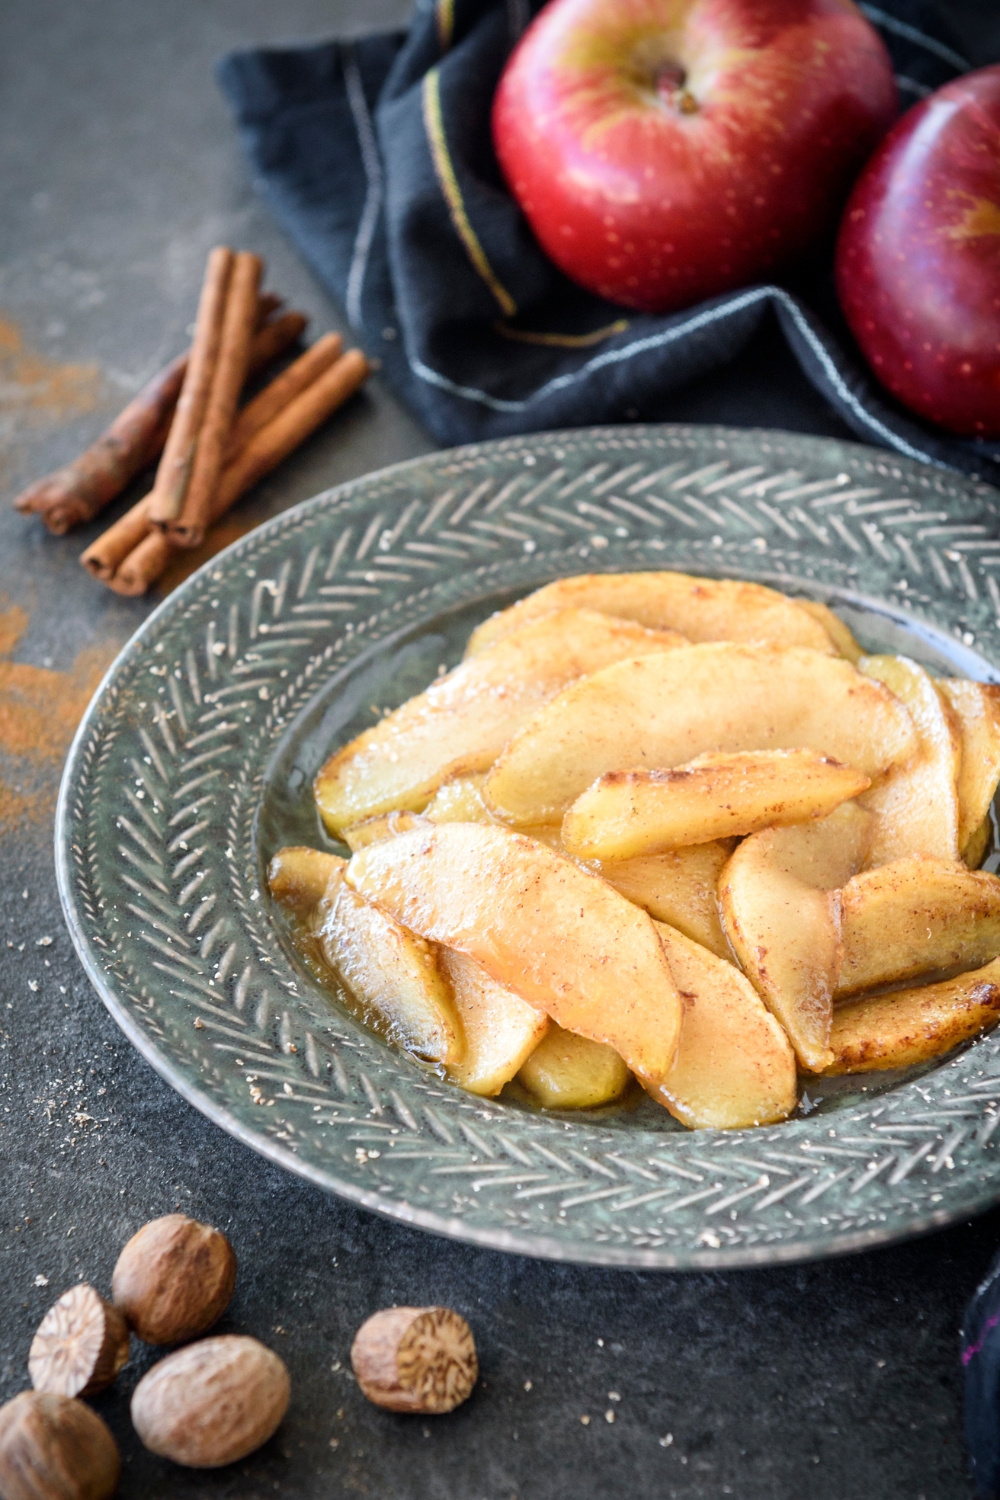 A bowl of baked apple slices coated in spices surrounded by cinnamon, nutmeg, and apples.